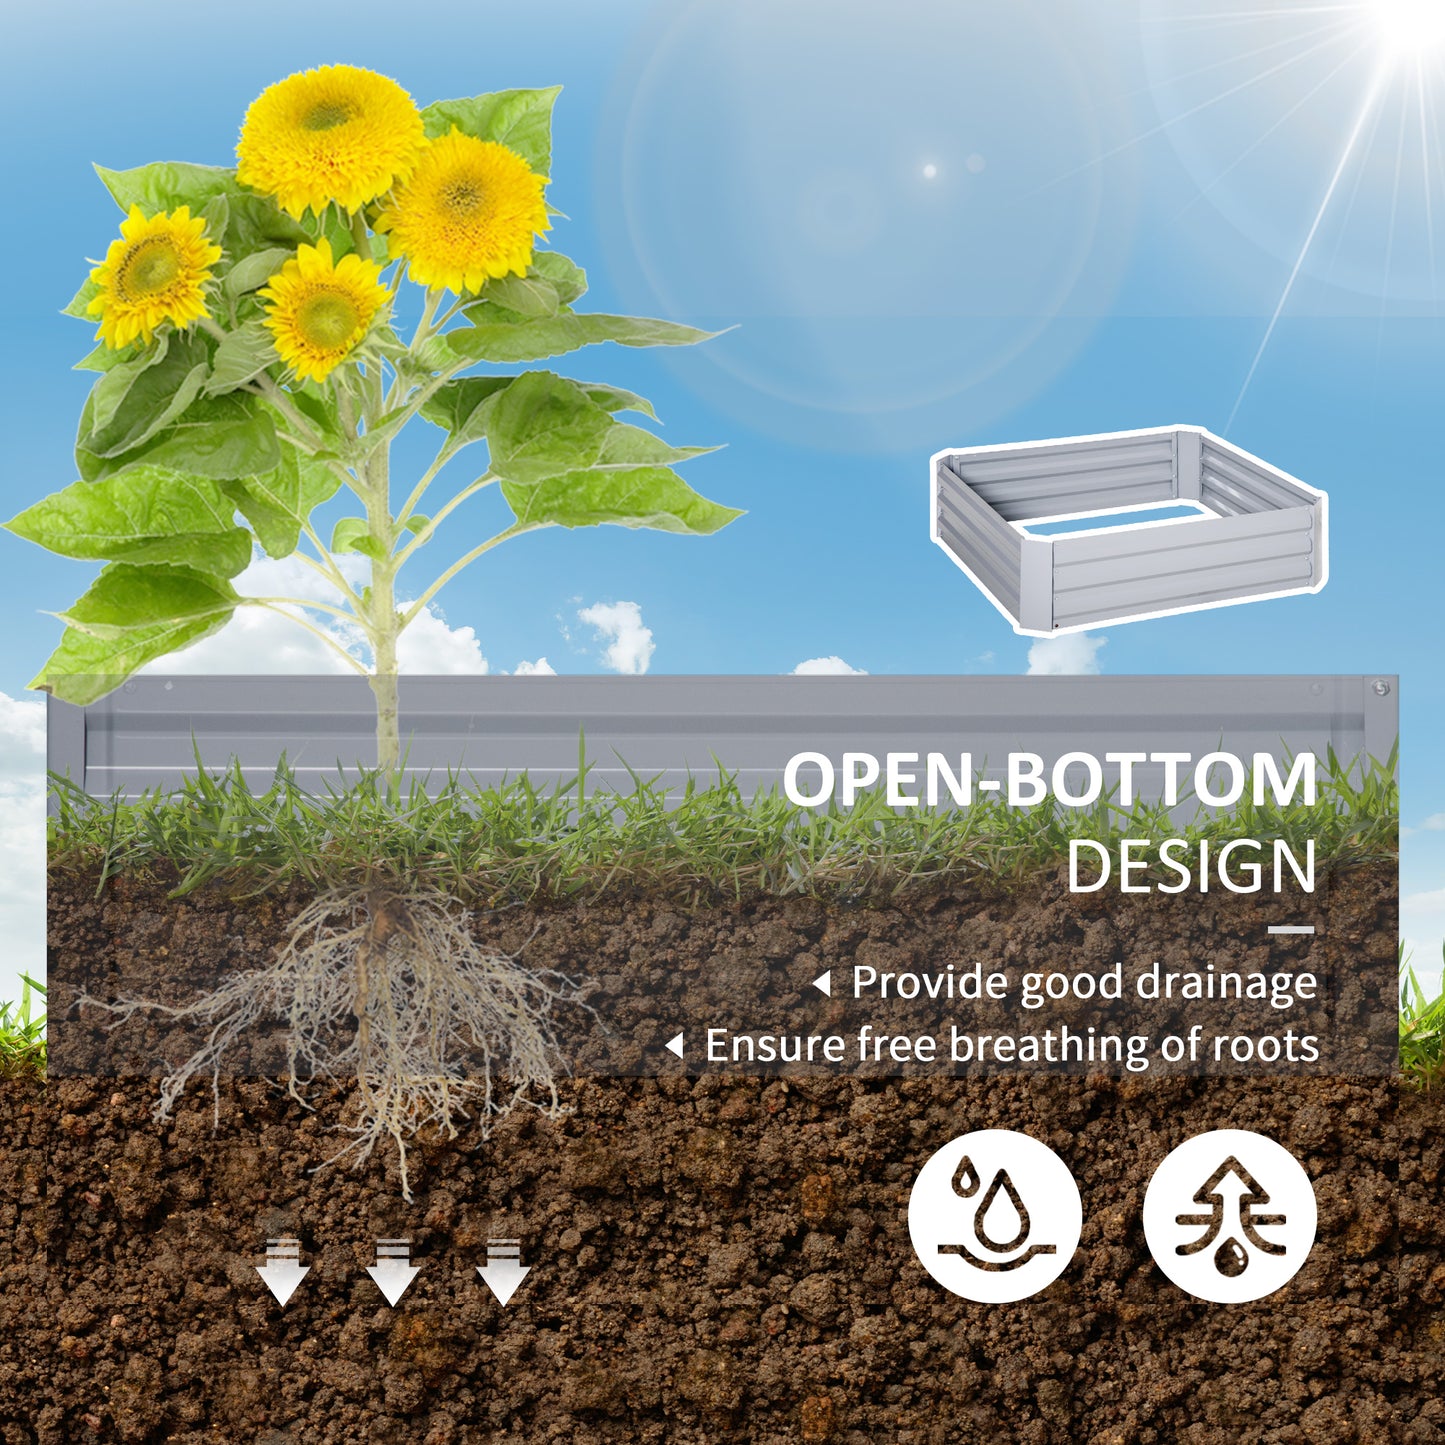 Outsunny Set of 2 Raised Garden Bed, Elevated Planter Box with Galvanized Steel Frame for Growing Flowers, Herbs, Succulents, 1m x 1m x 0.3m Bed Boxes Easy Quick Setup